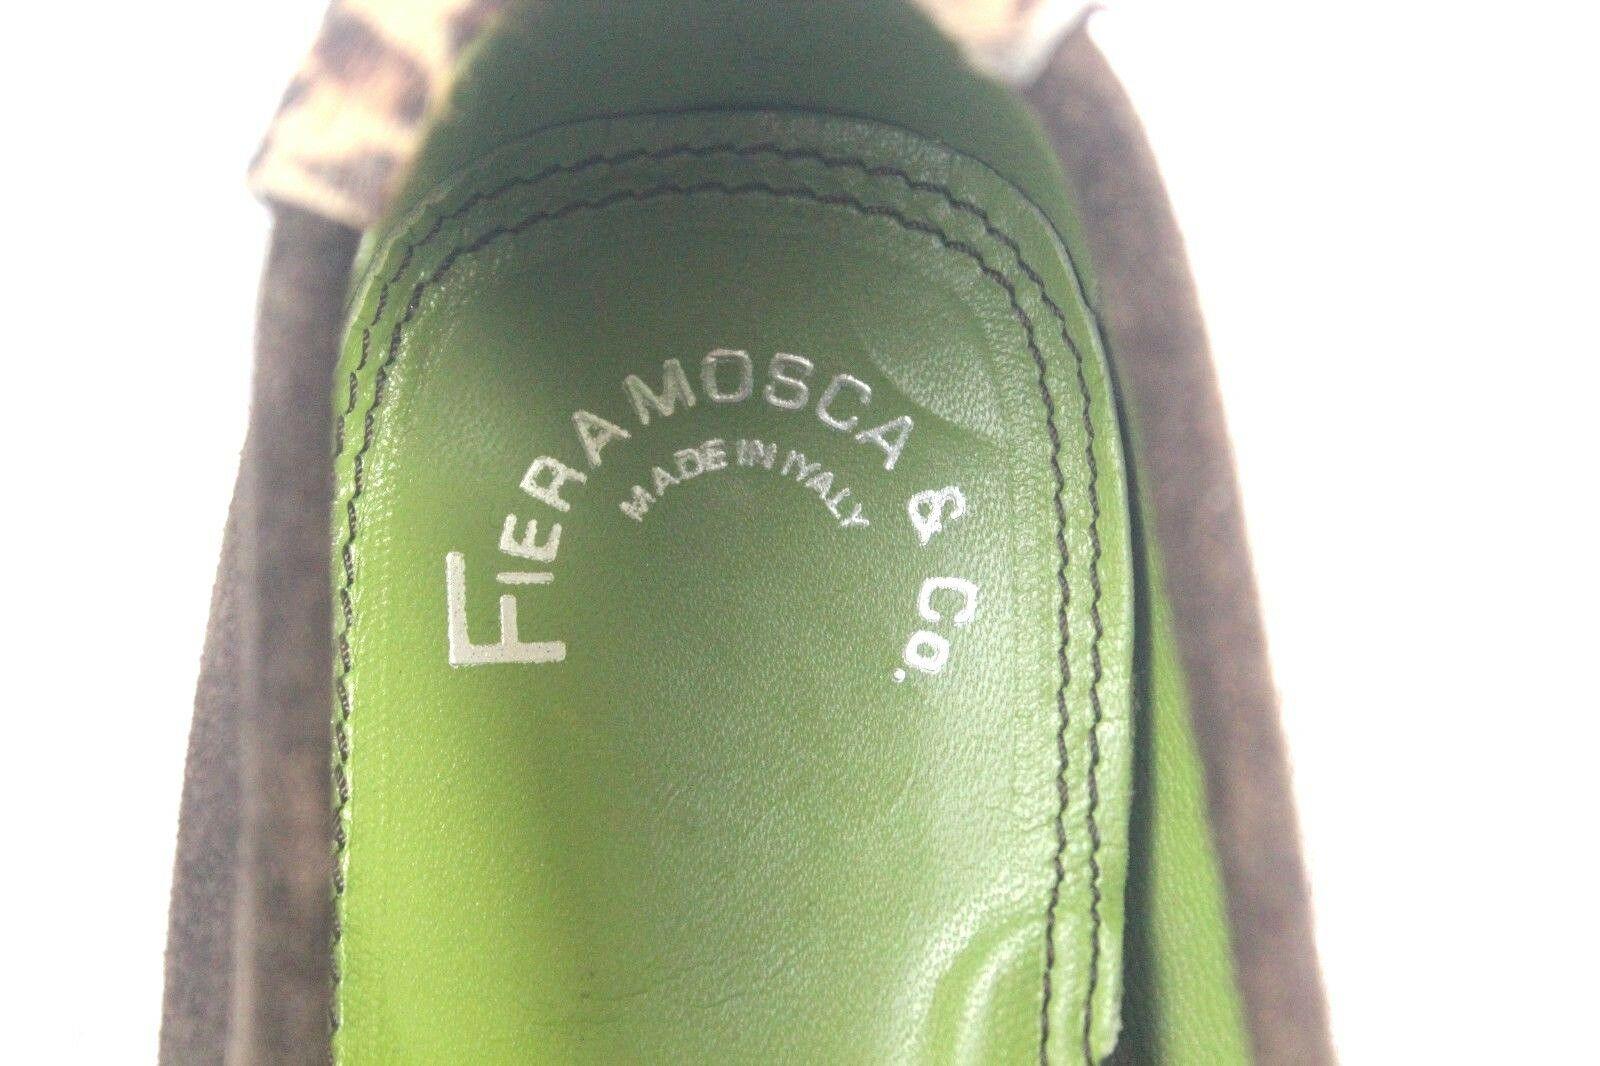 Fieramosca & Co Suede Leopard Calf Hair Moccasin Loafer Flat Women Shoes Sz 5.5 - SVNYFancy